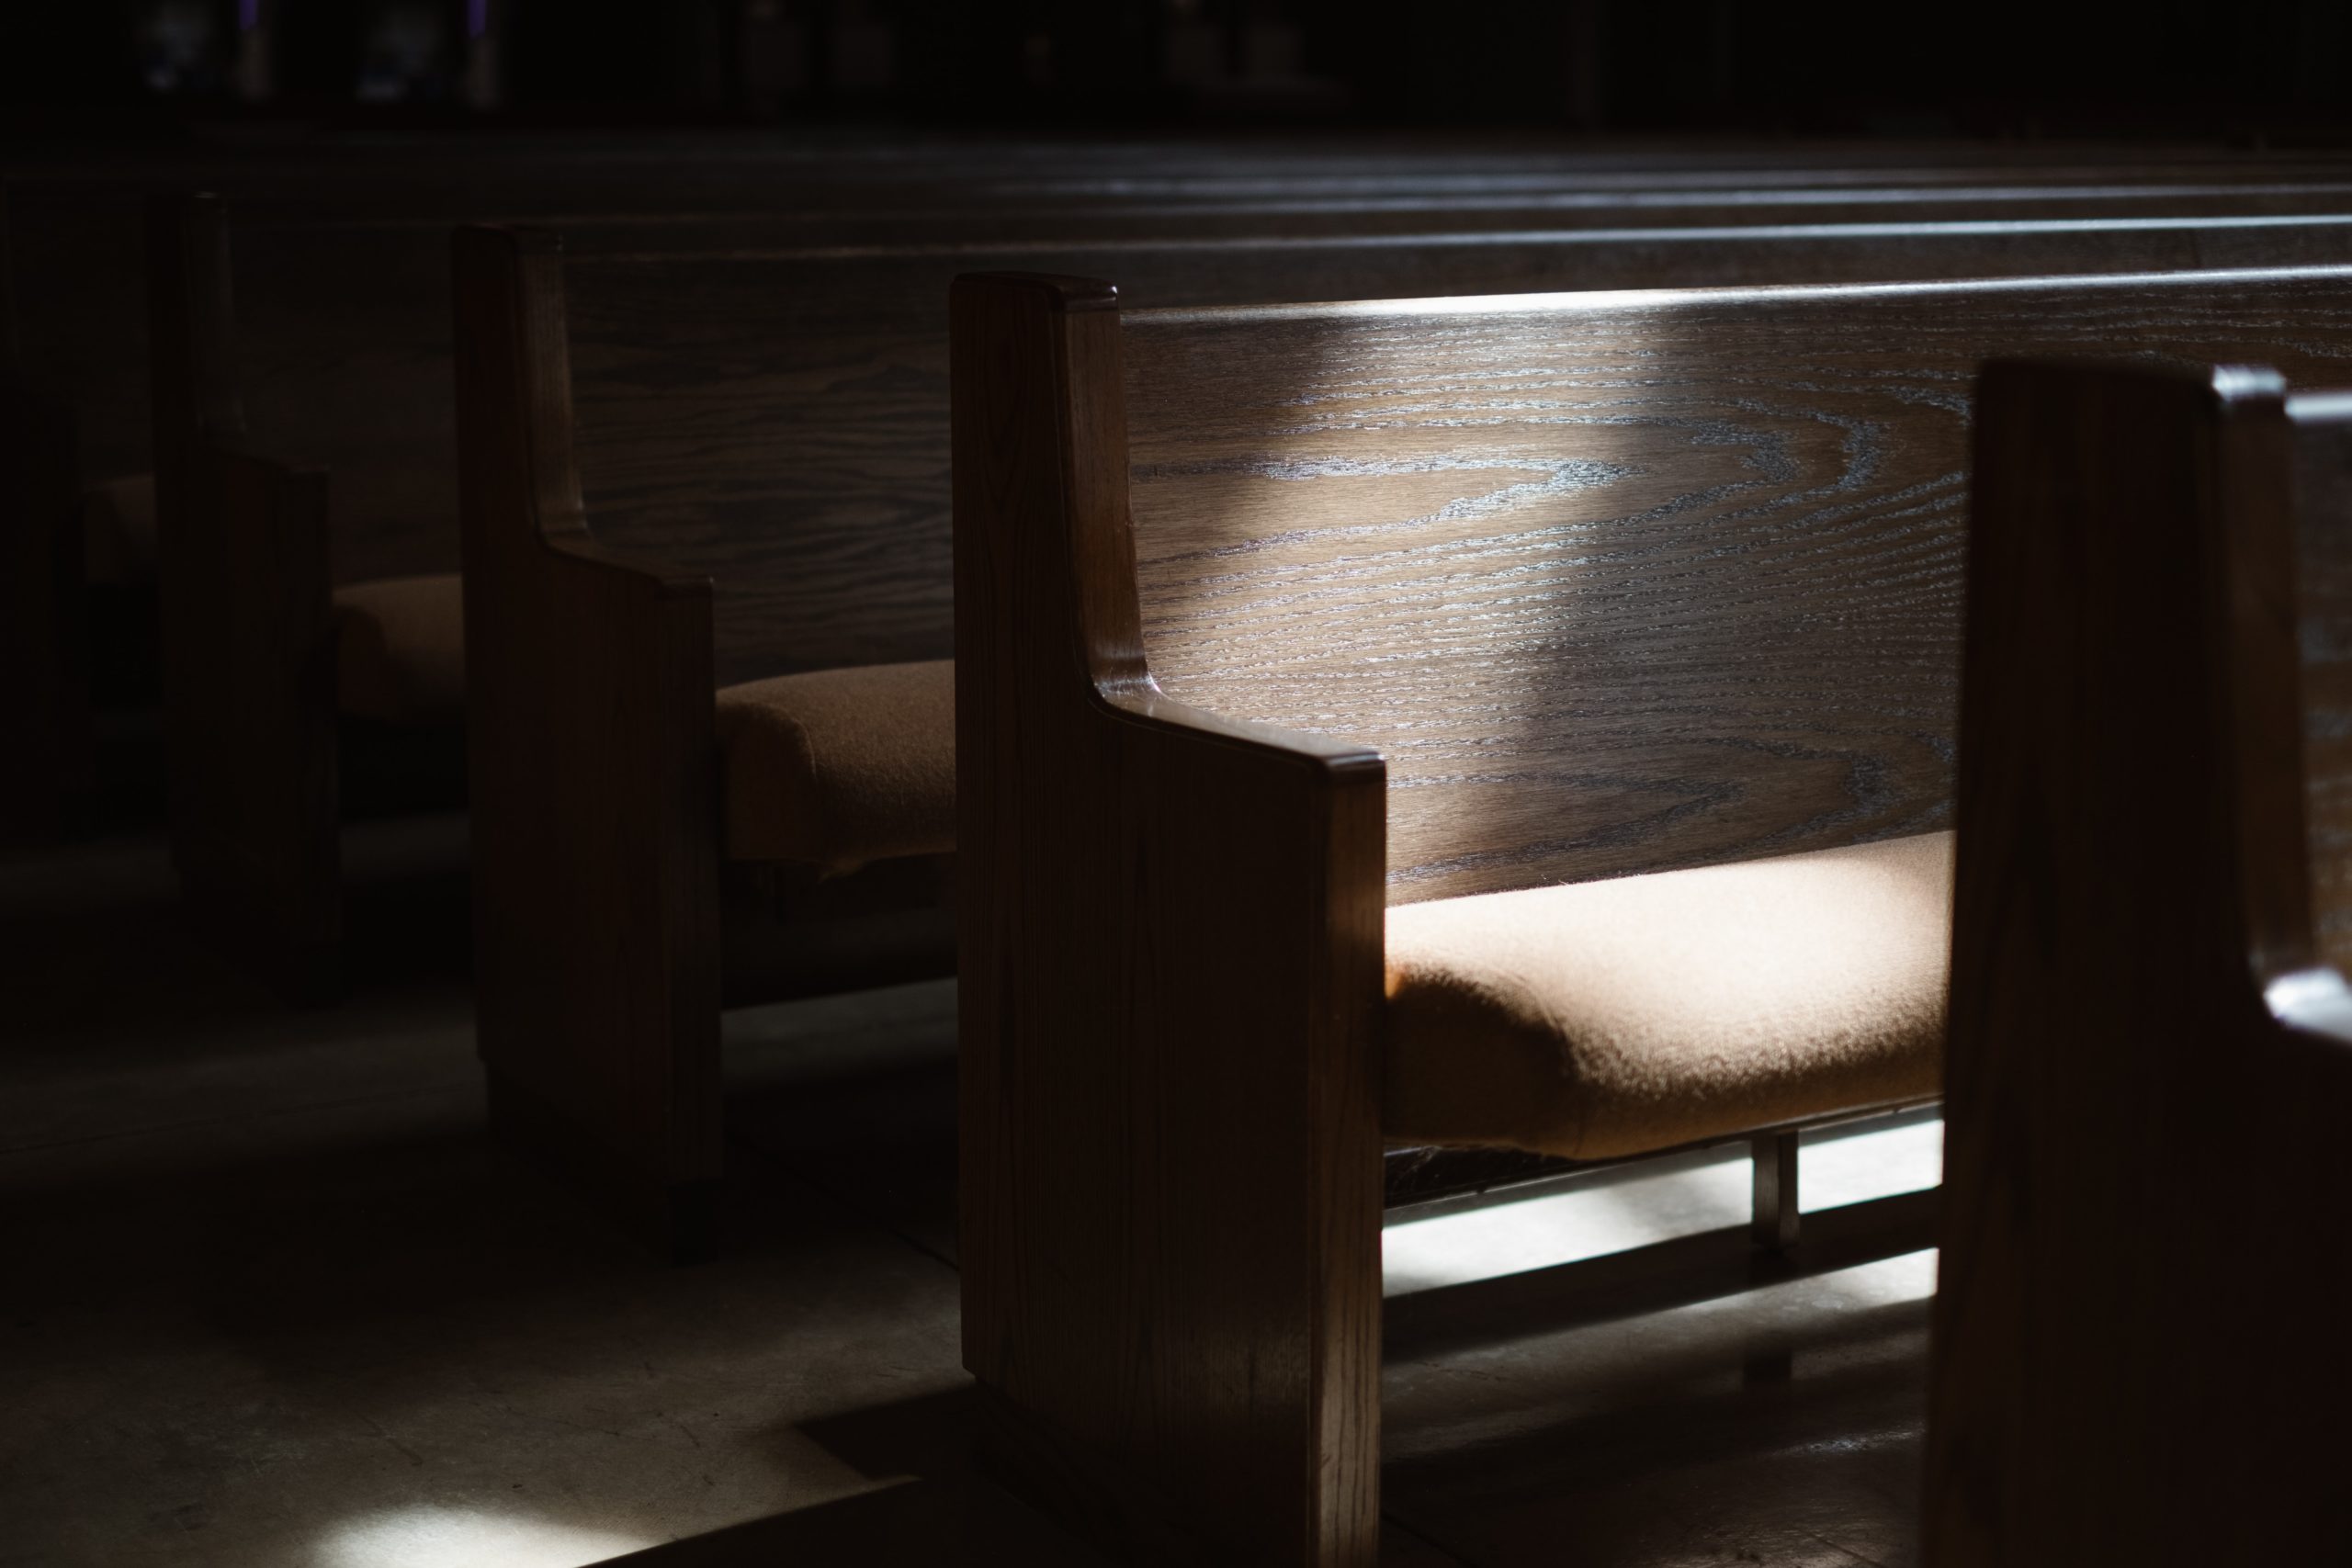 Community Safety: Pews in a House of Worship